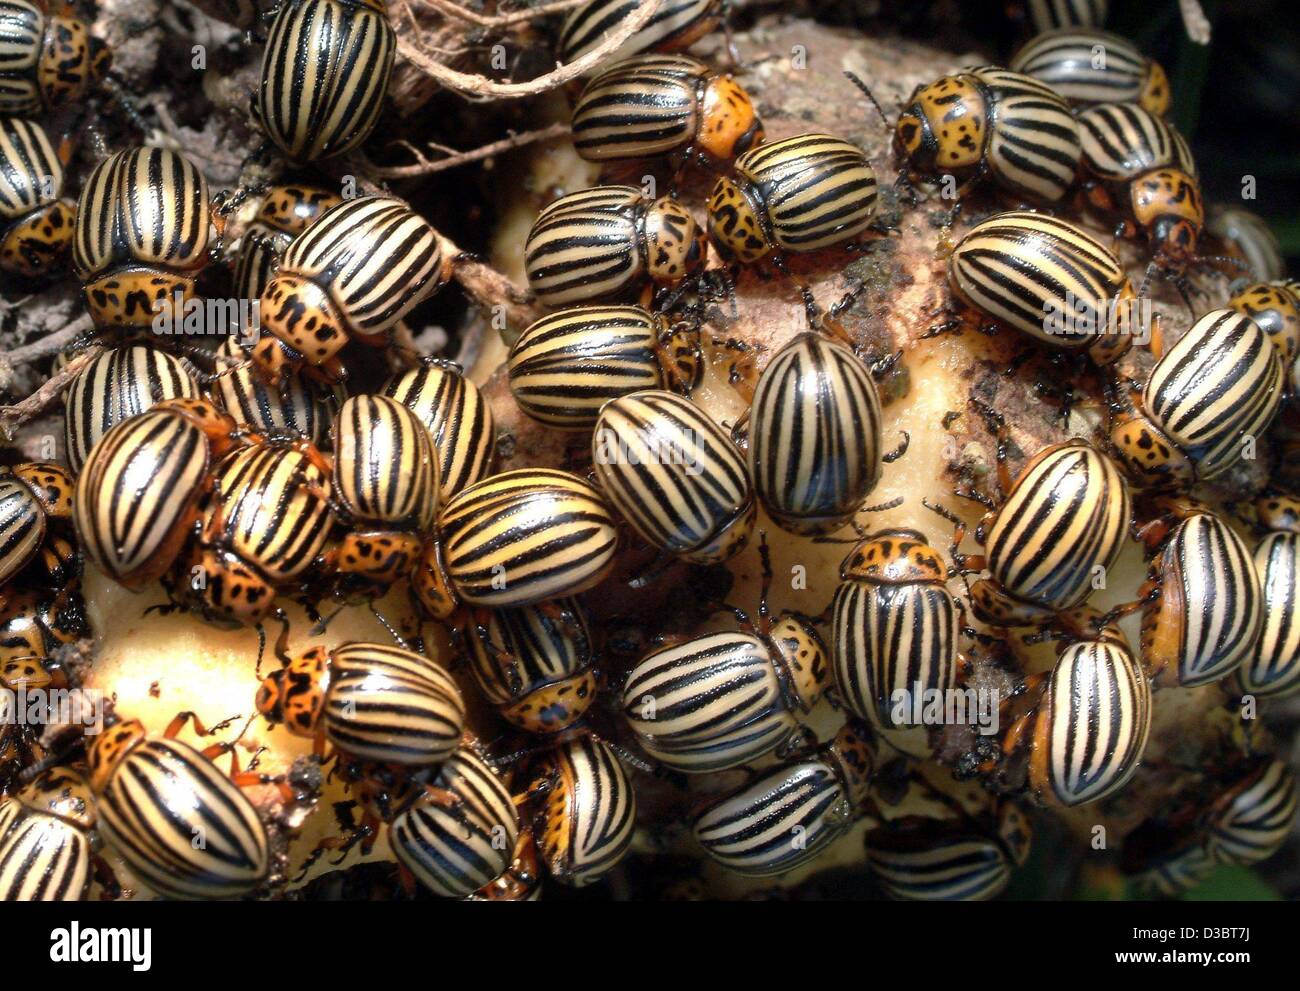 (dpa) - Numerous potatoe beetles (leptinotarsa decemlineata) scrimmage on a potatoe on a field in Luechow-Dannenberg, Germany, 17 September 2003. A mysterious plague of potatoe beetles is causing problems for the residents who live nearby the field.  Hundrest of thousends of yellow and black striped Stock Photo